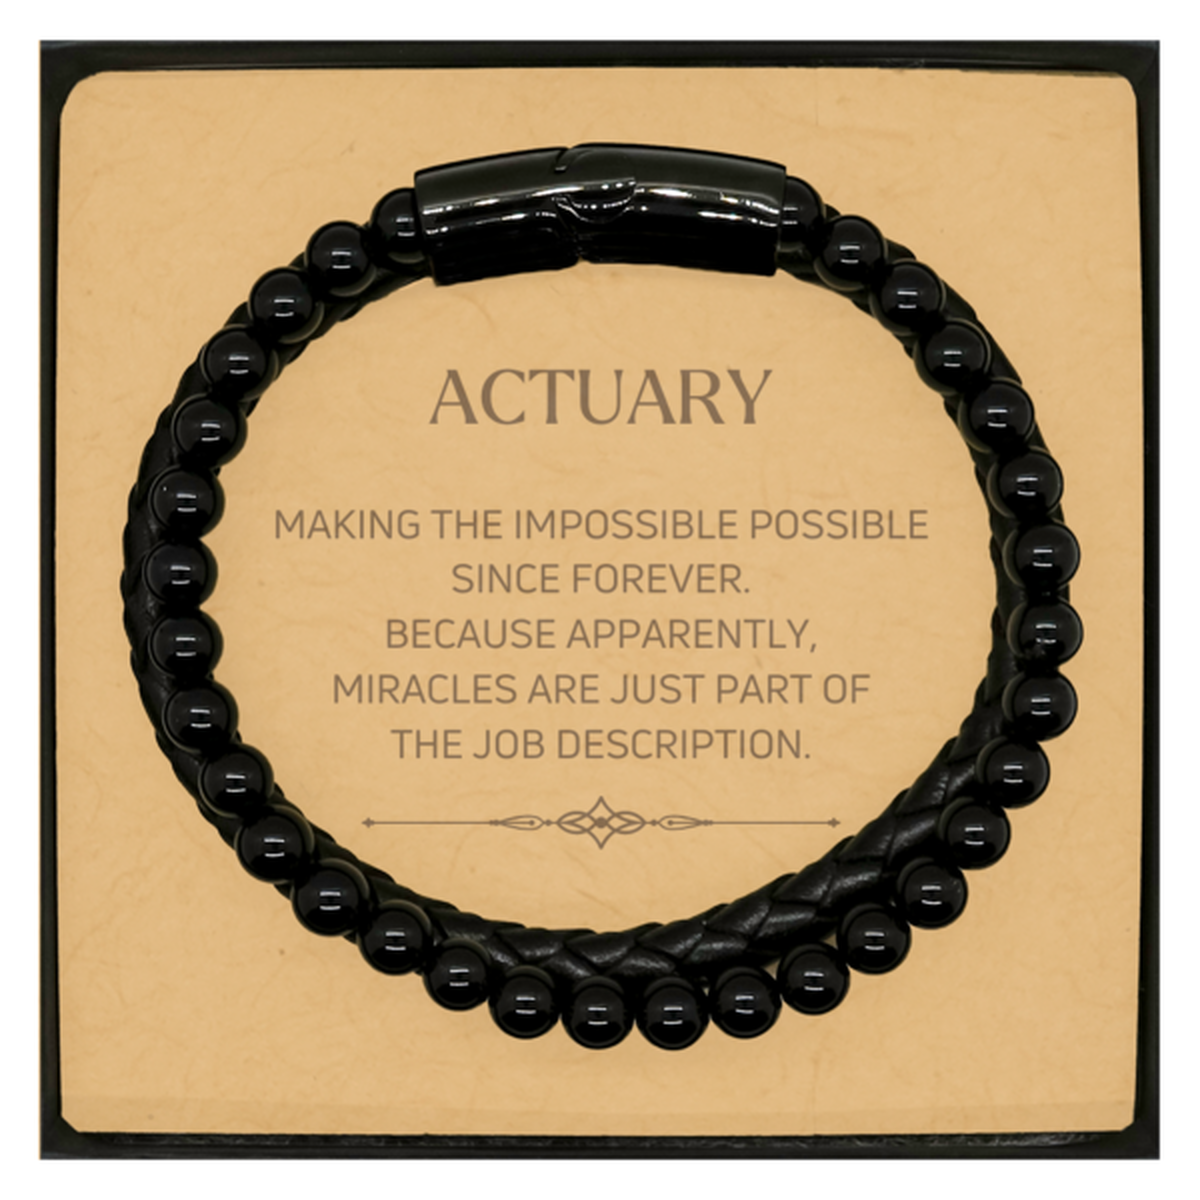 Funny Actuary Gifts, Miracles are just part of the job description, Inspirational Birthday Christmas Stone Leather Bracelets For Actuary, Men, Women, Coworkers, Friends, Boss